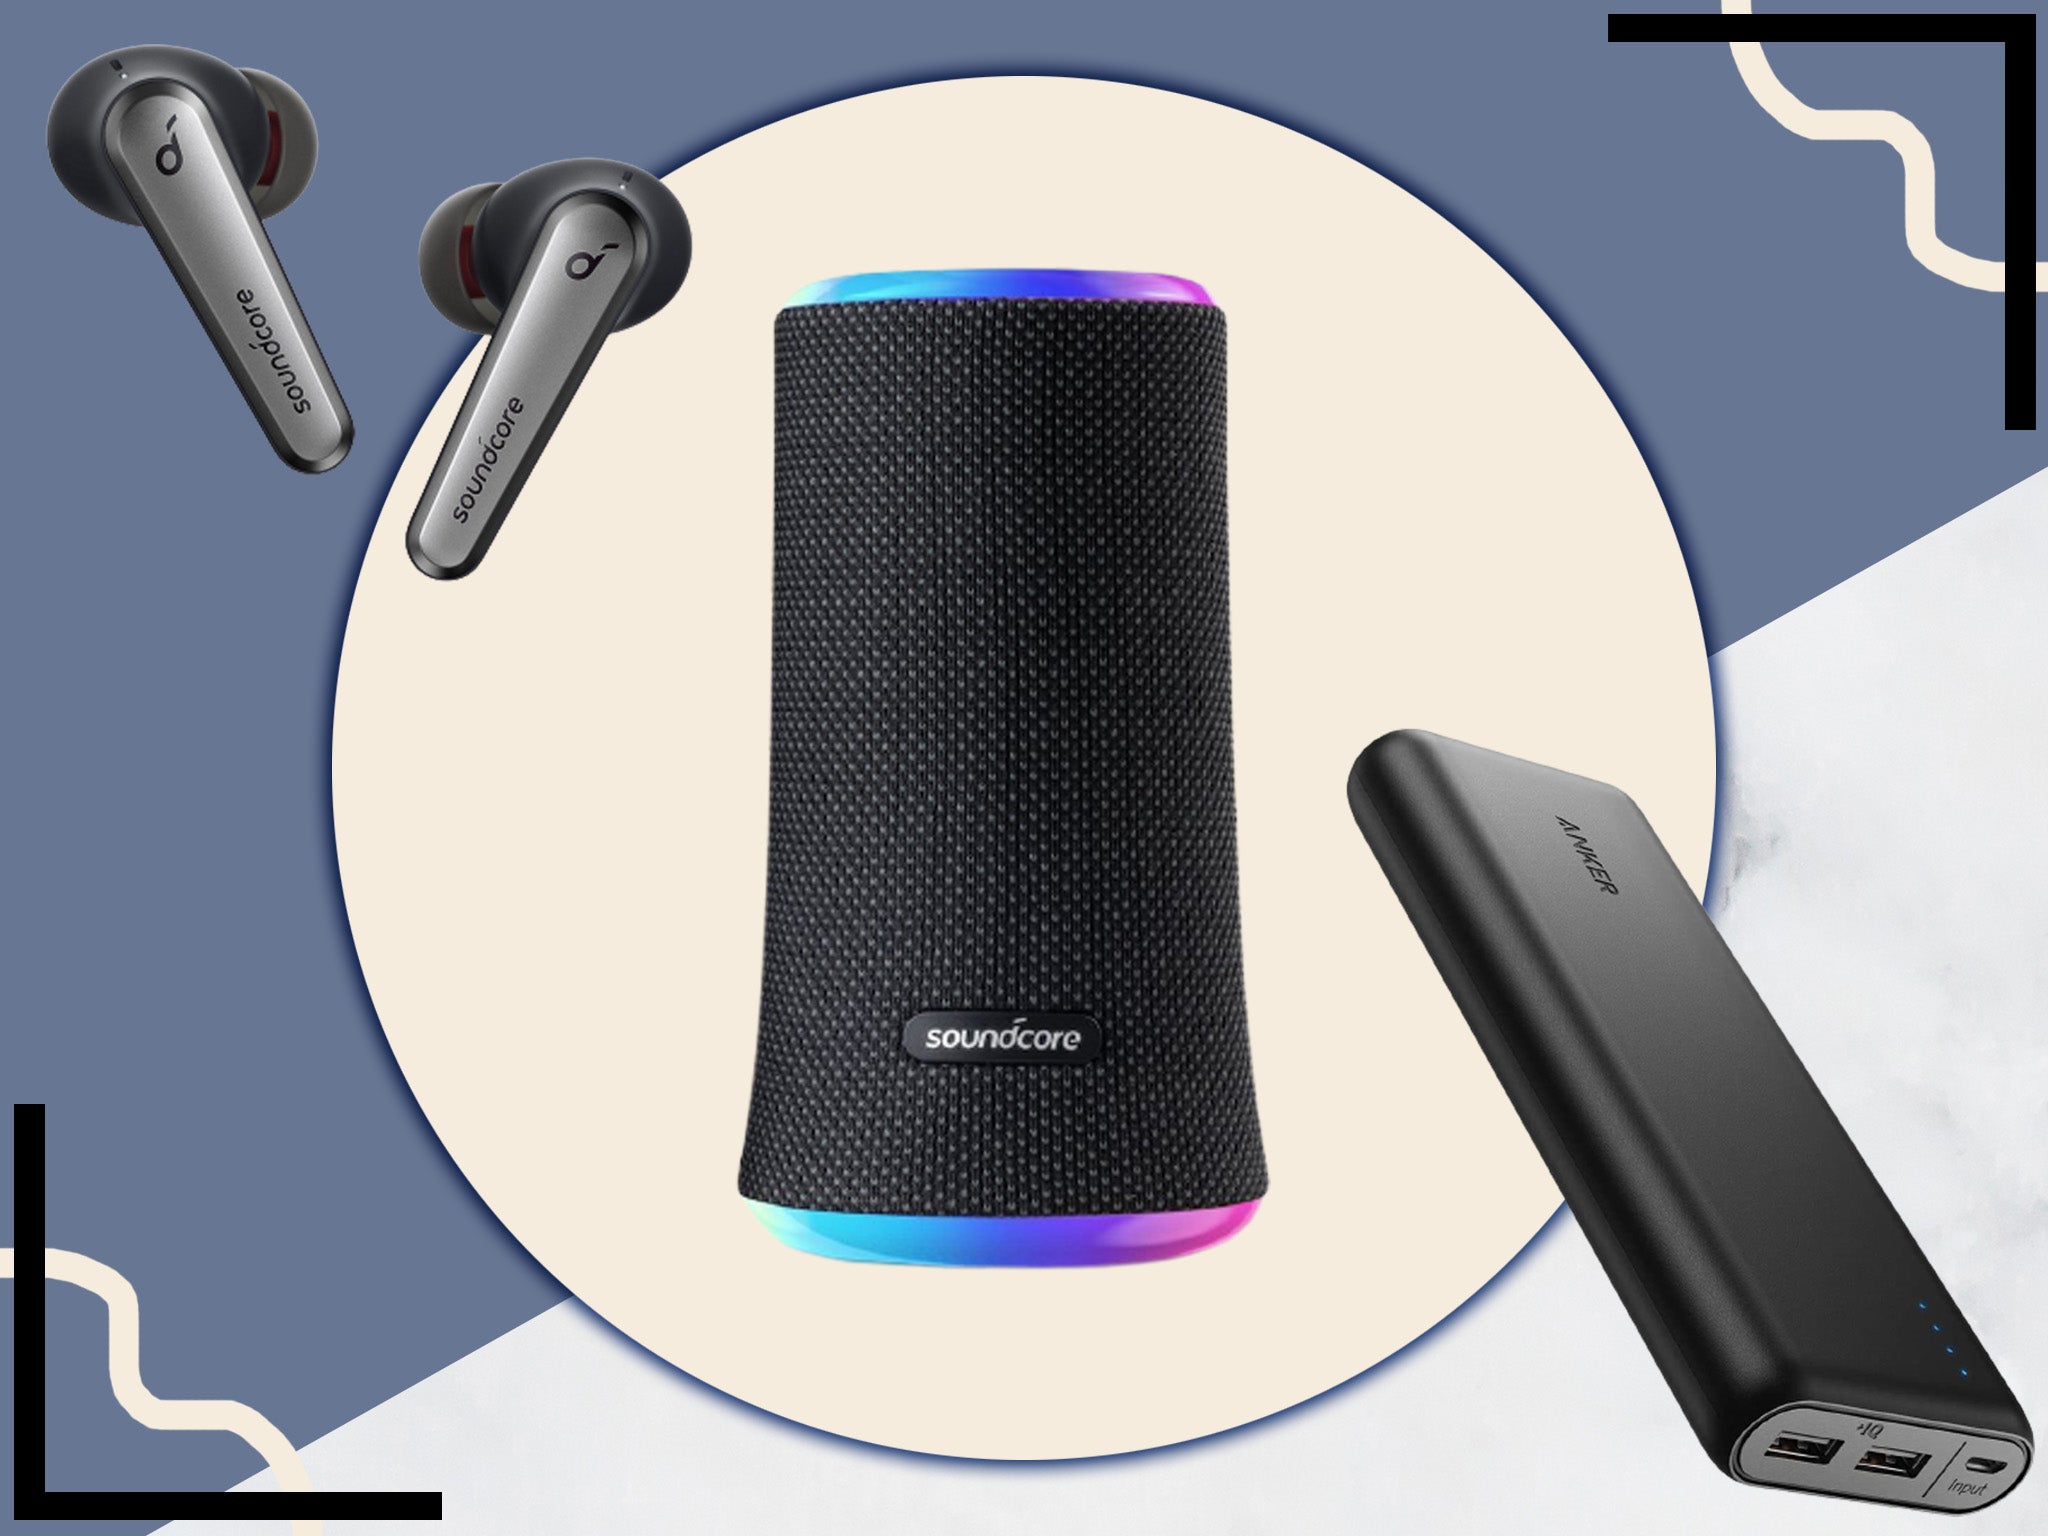 Anker buying guide: Soundcore speakers, power banks and more